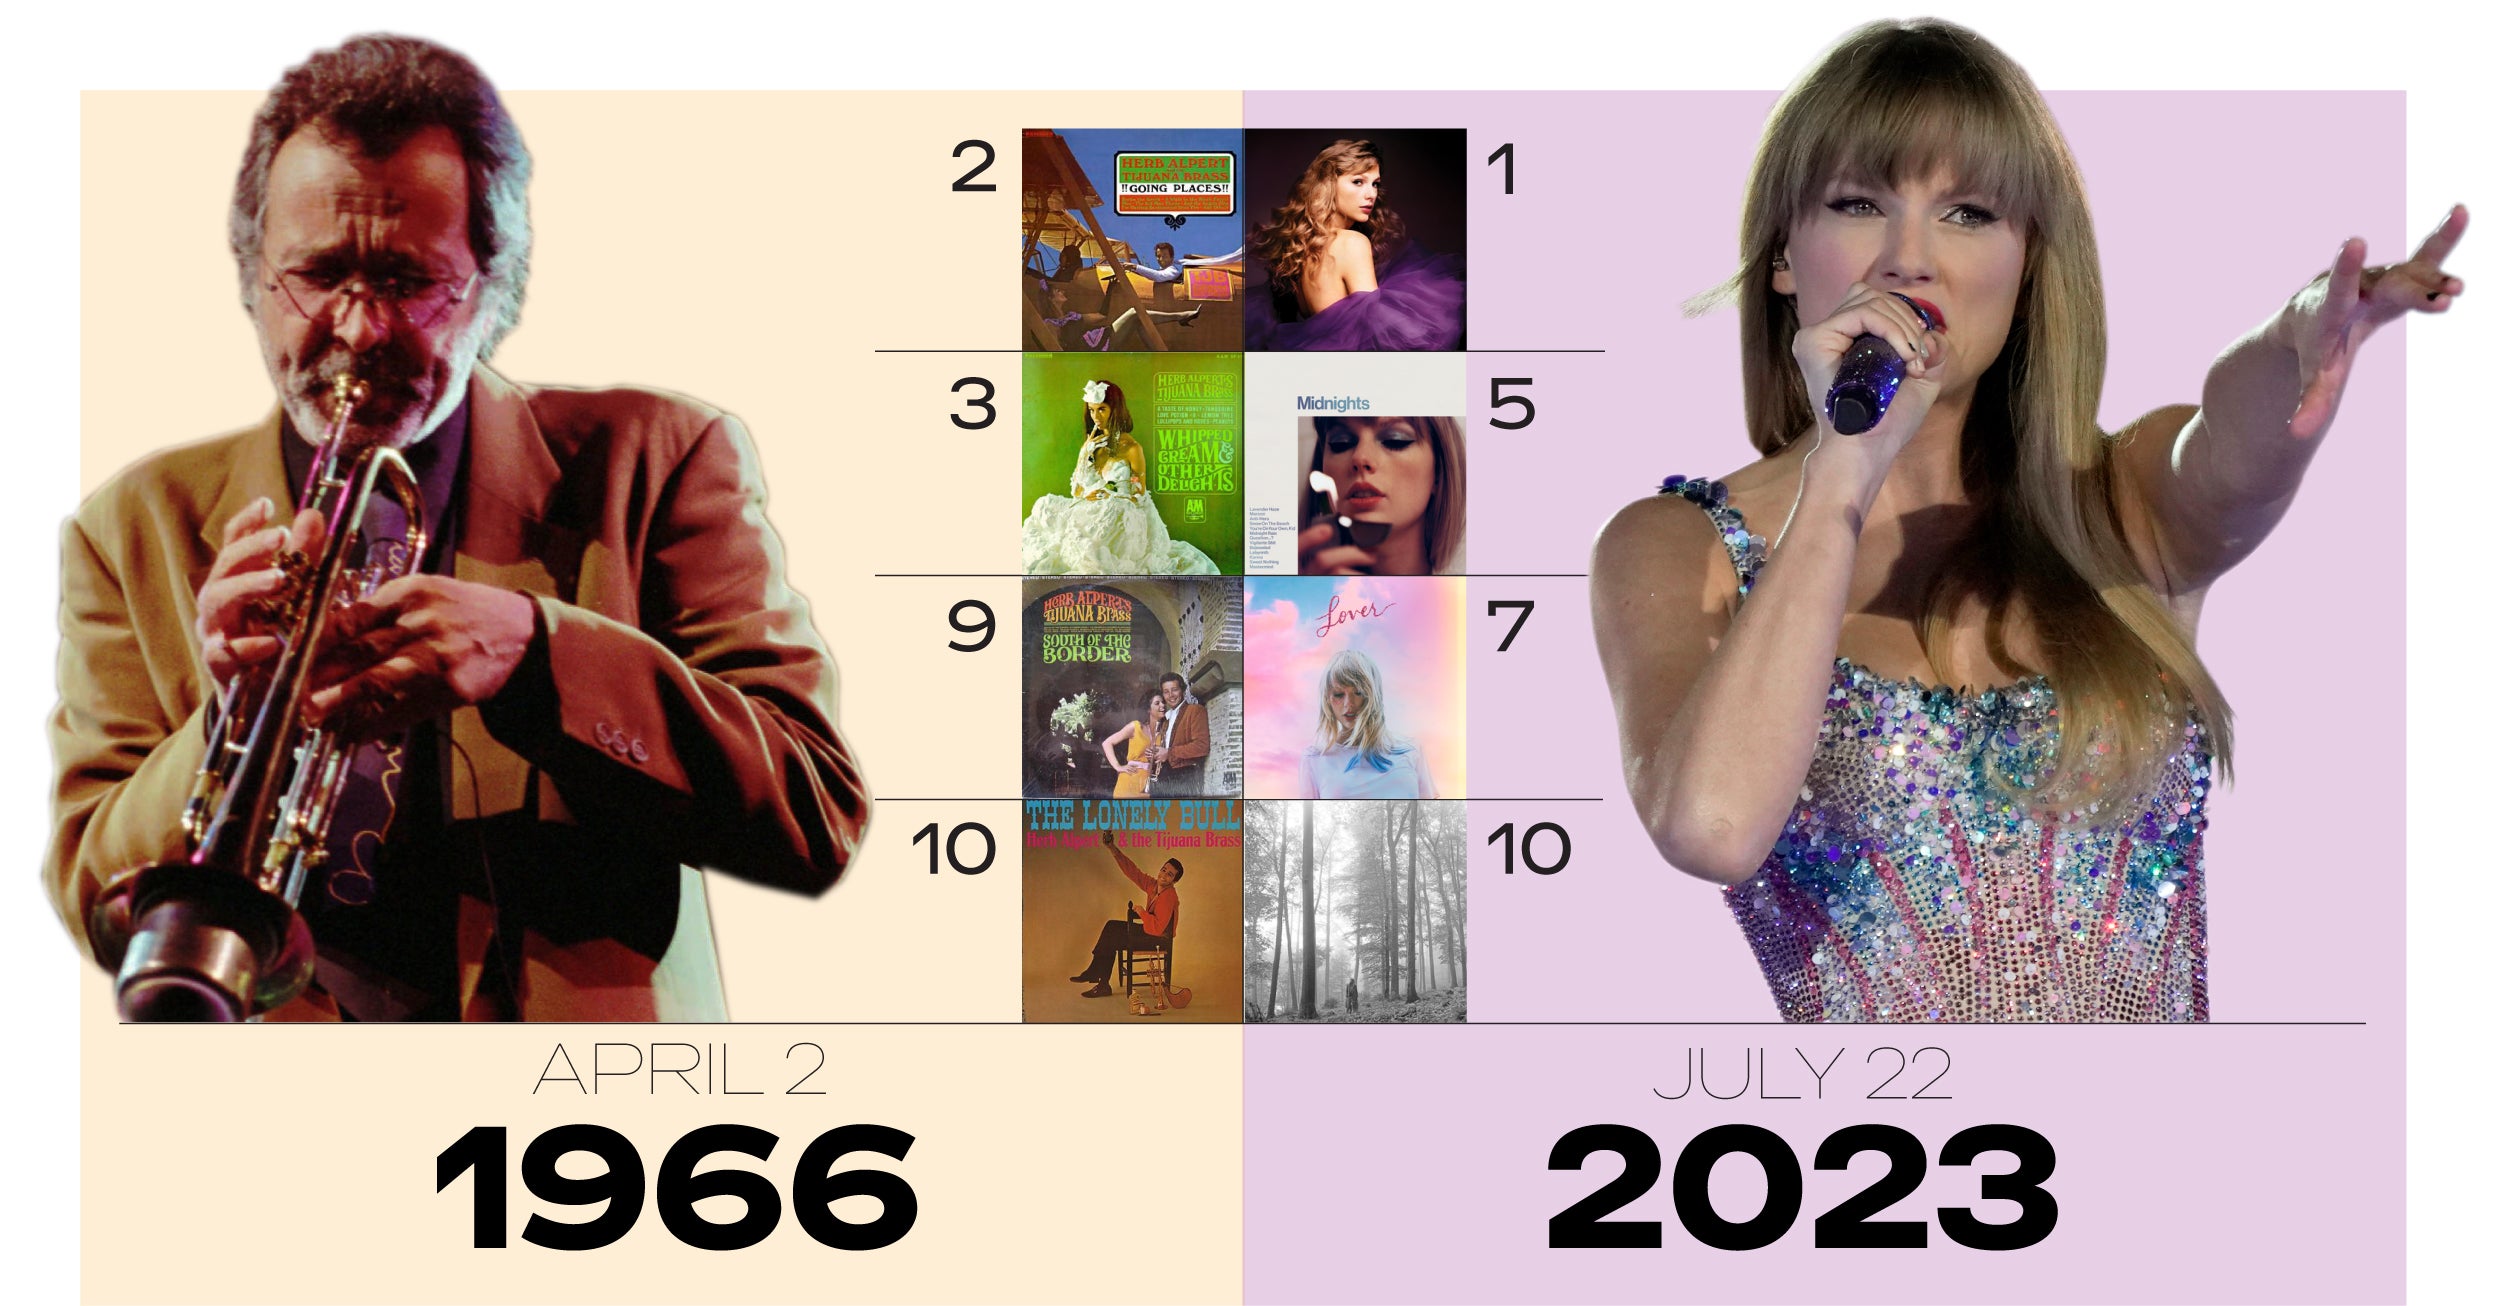 Taylor Swift: What makes the singer so popular?